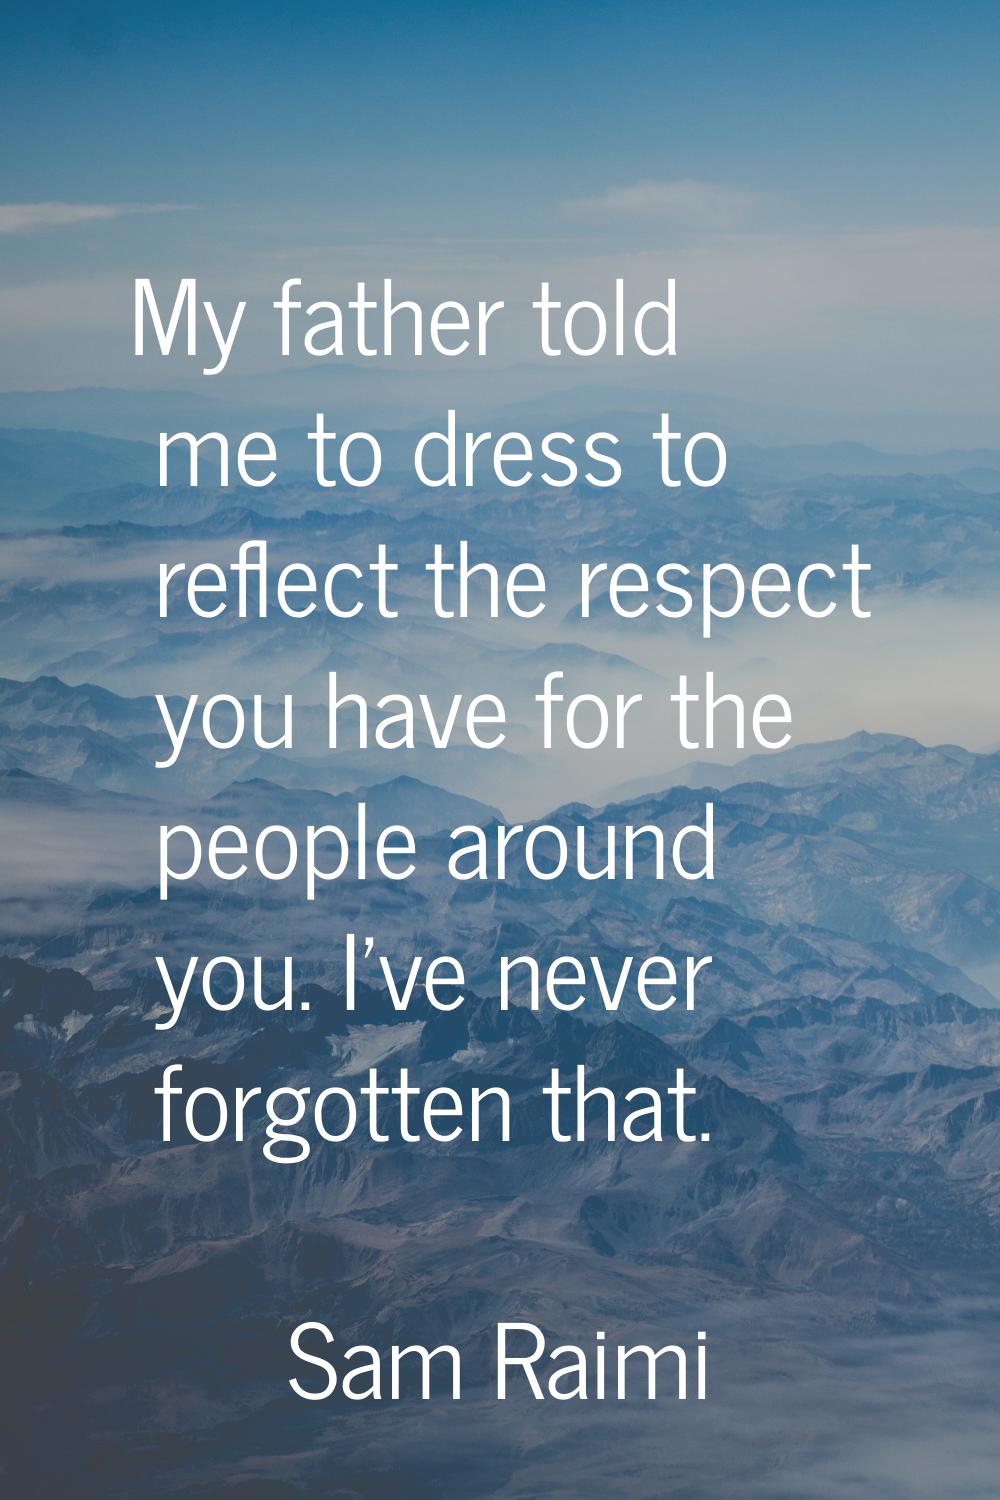 My father told me to dress to reflect the respect you have for the people around you. I've never fo